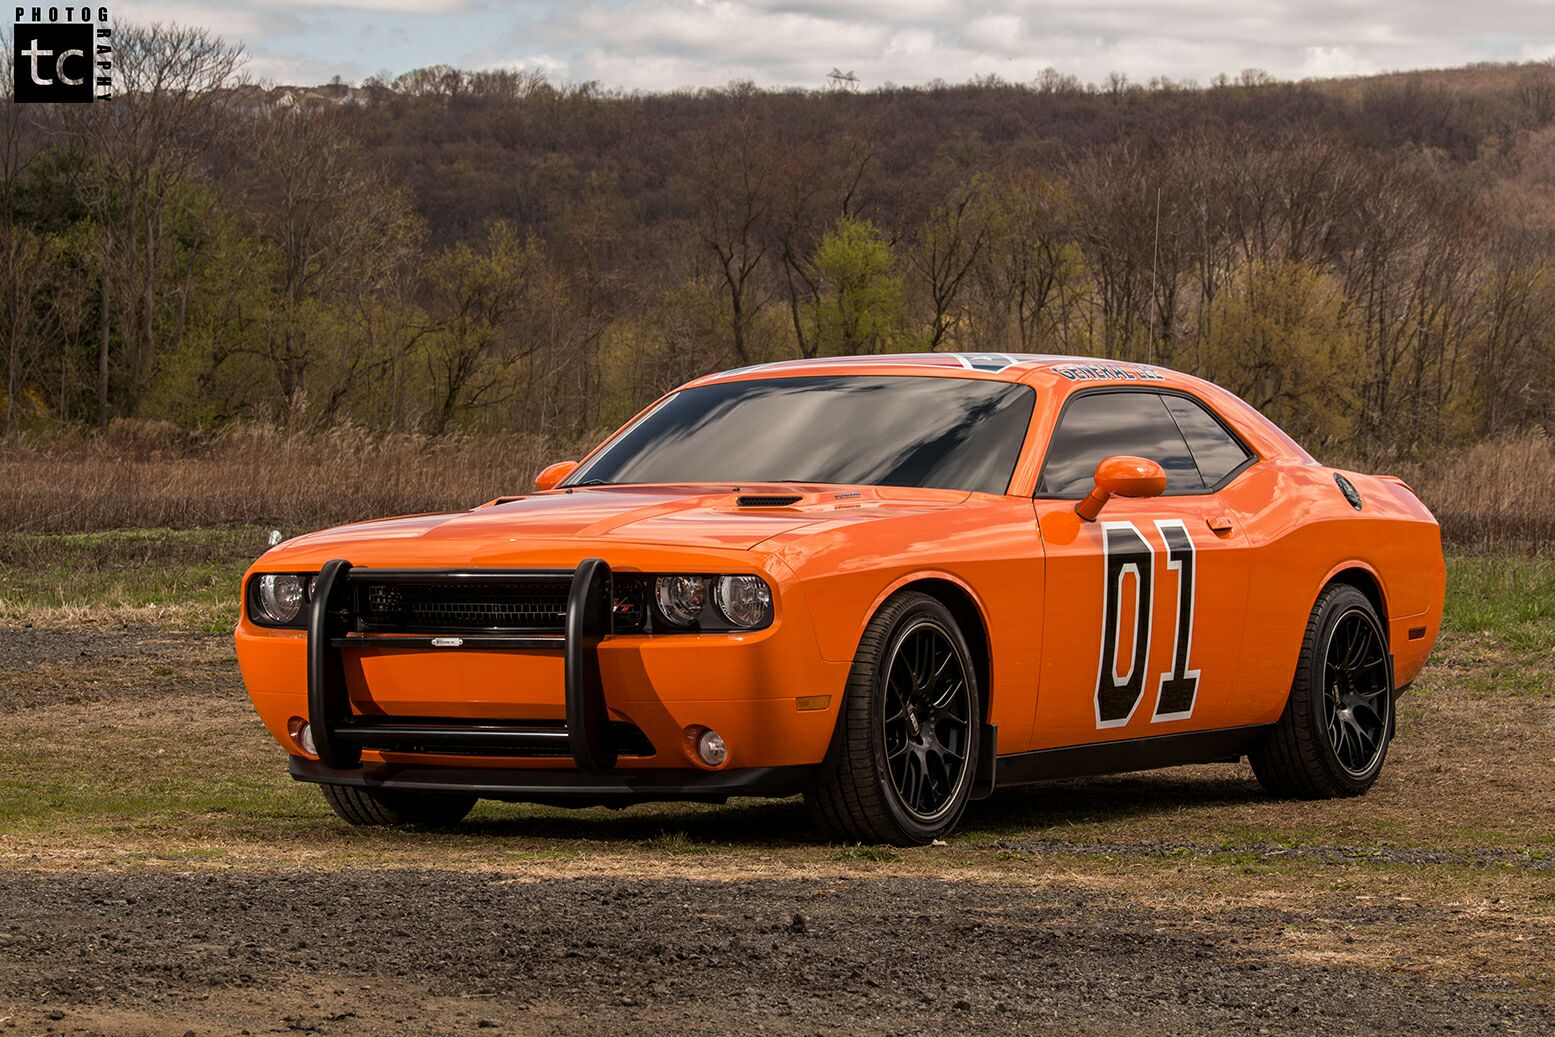 general-lee-archives-the-dukes-of-hazzard